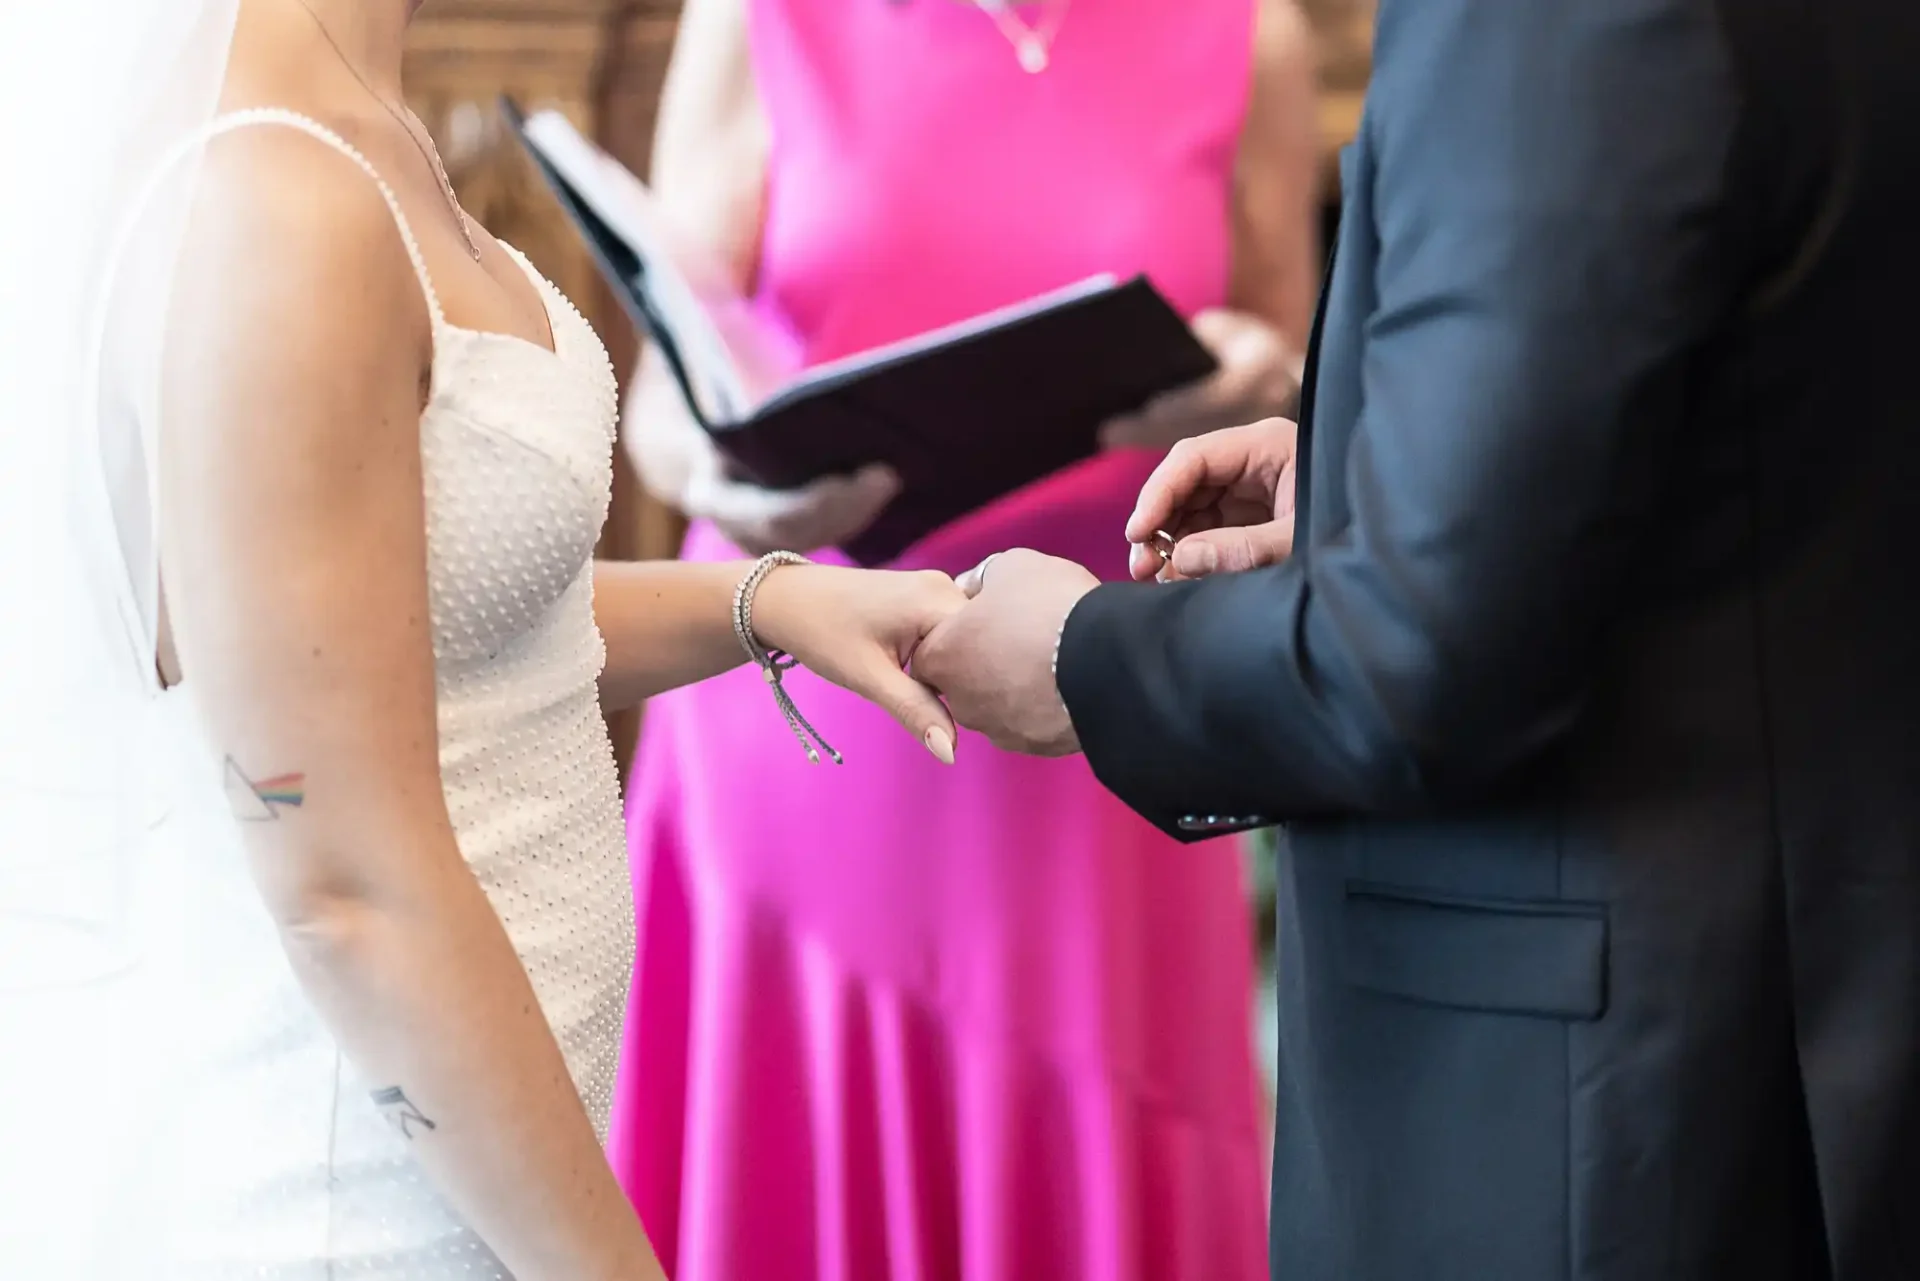 Bride in a white dress and groom in a black suit exchange rings during a wedding ceremony, with an officiant and bridesmaid in pink visible in the background.